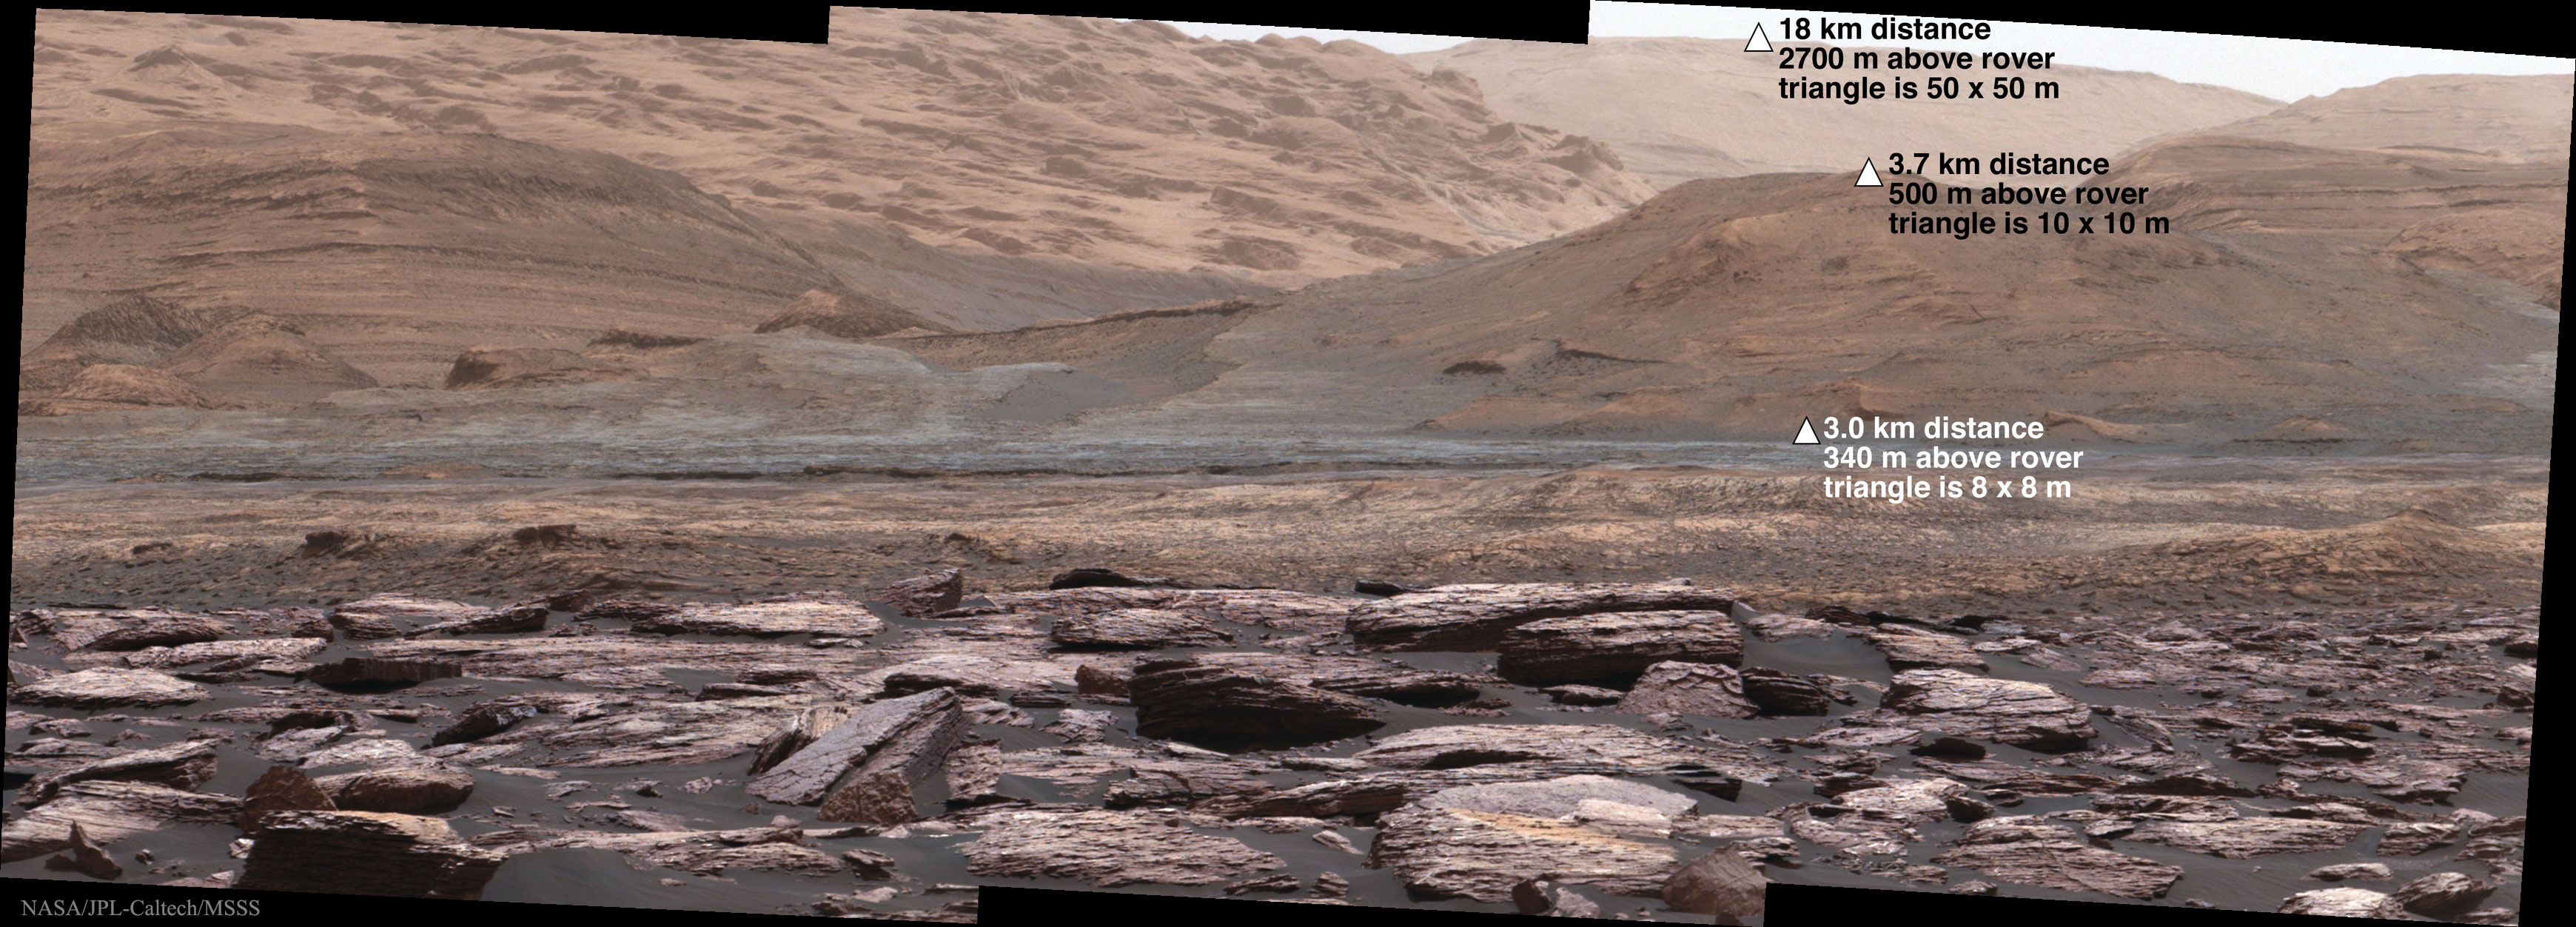 Astronomy Picture of the Day LowerMtSharp_Curiosity_3480_annotated